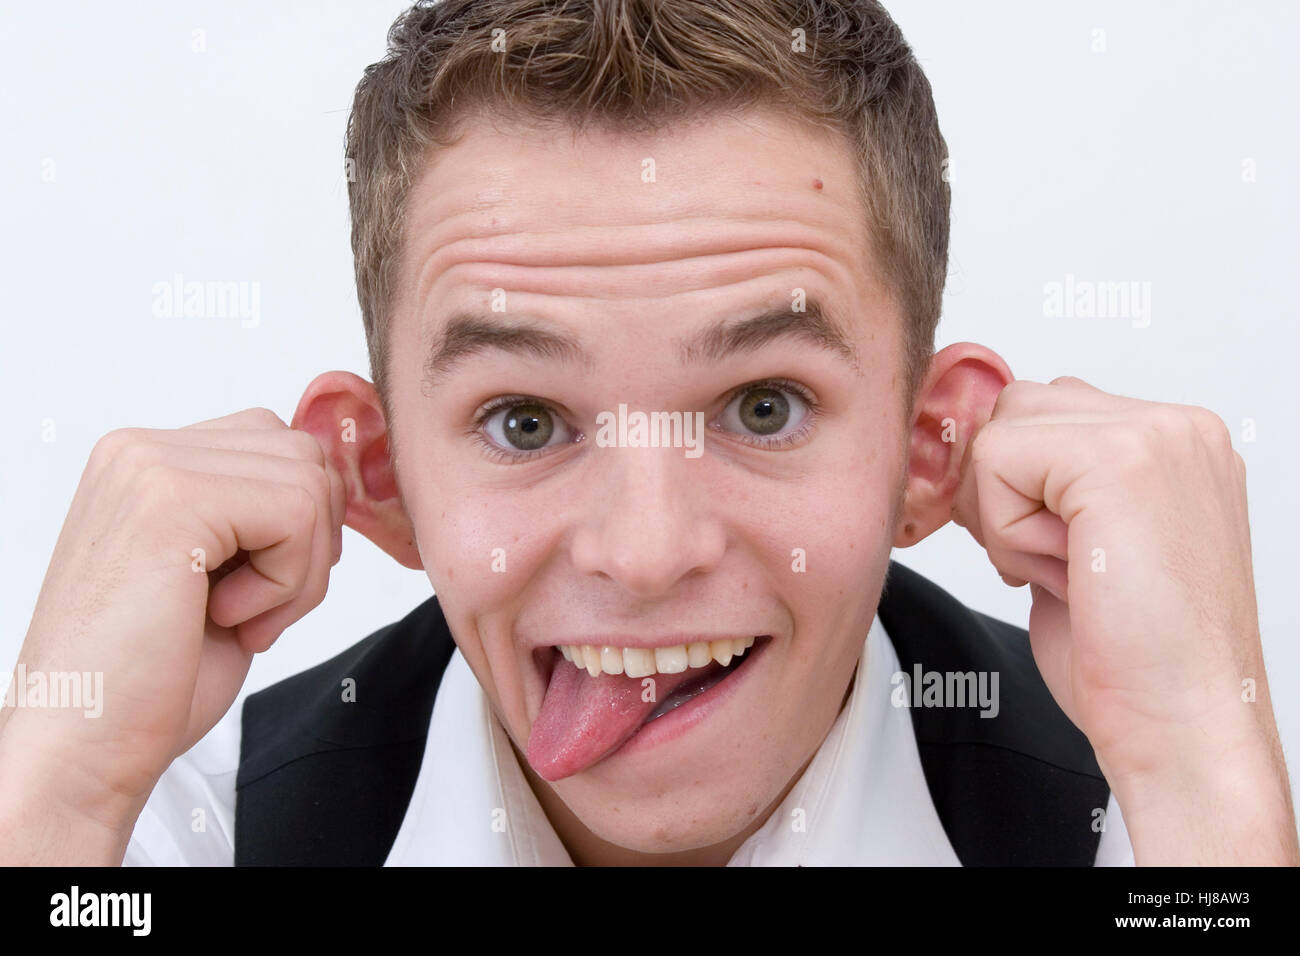 Young man pulls faces Stock Photo